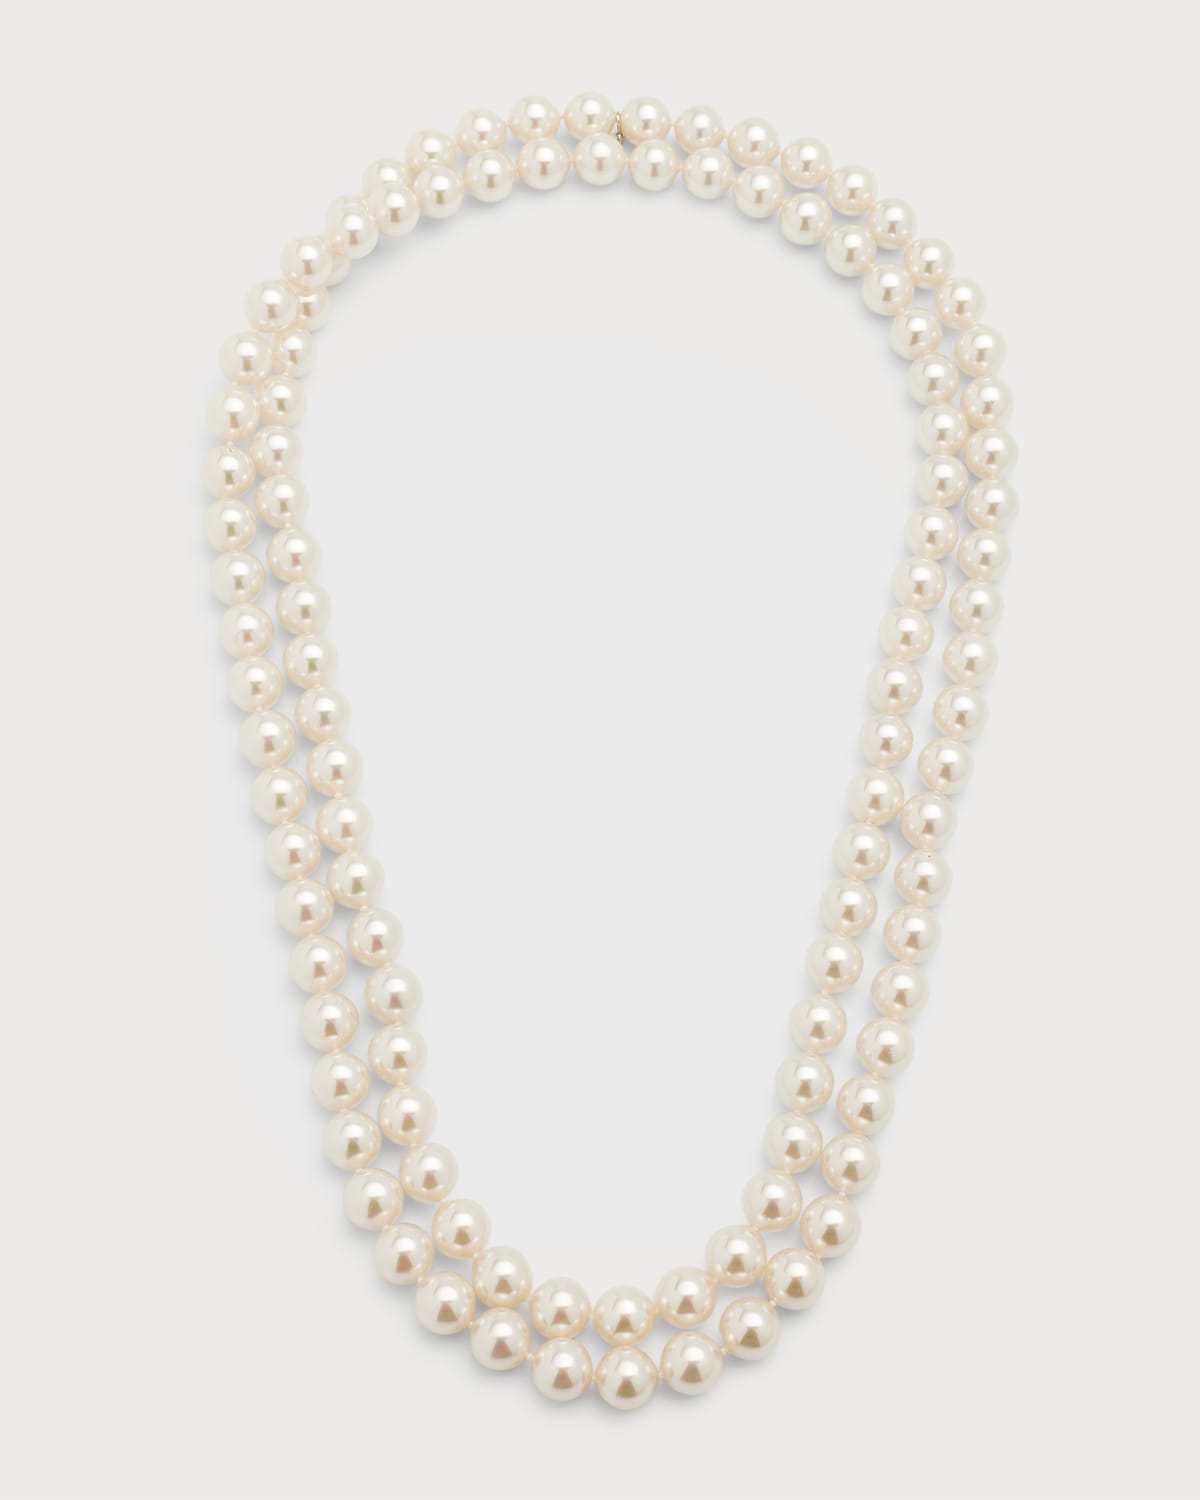 Jour Pearl-Strand Necklace, 48"L